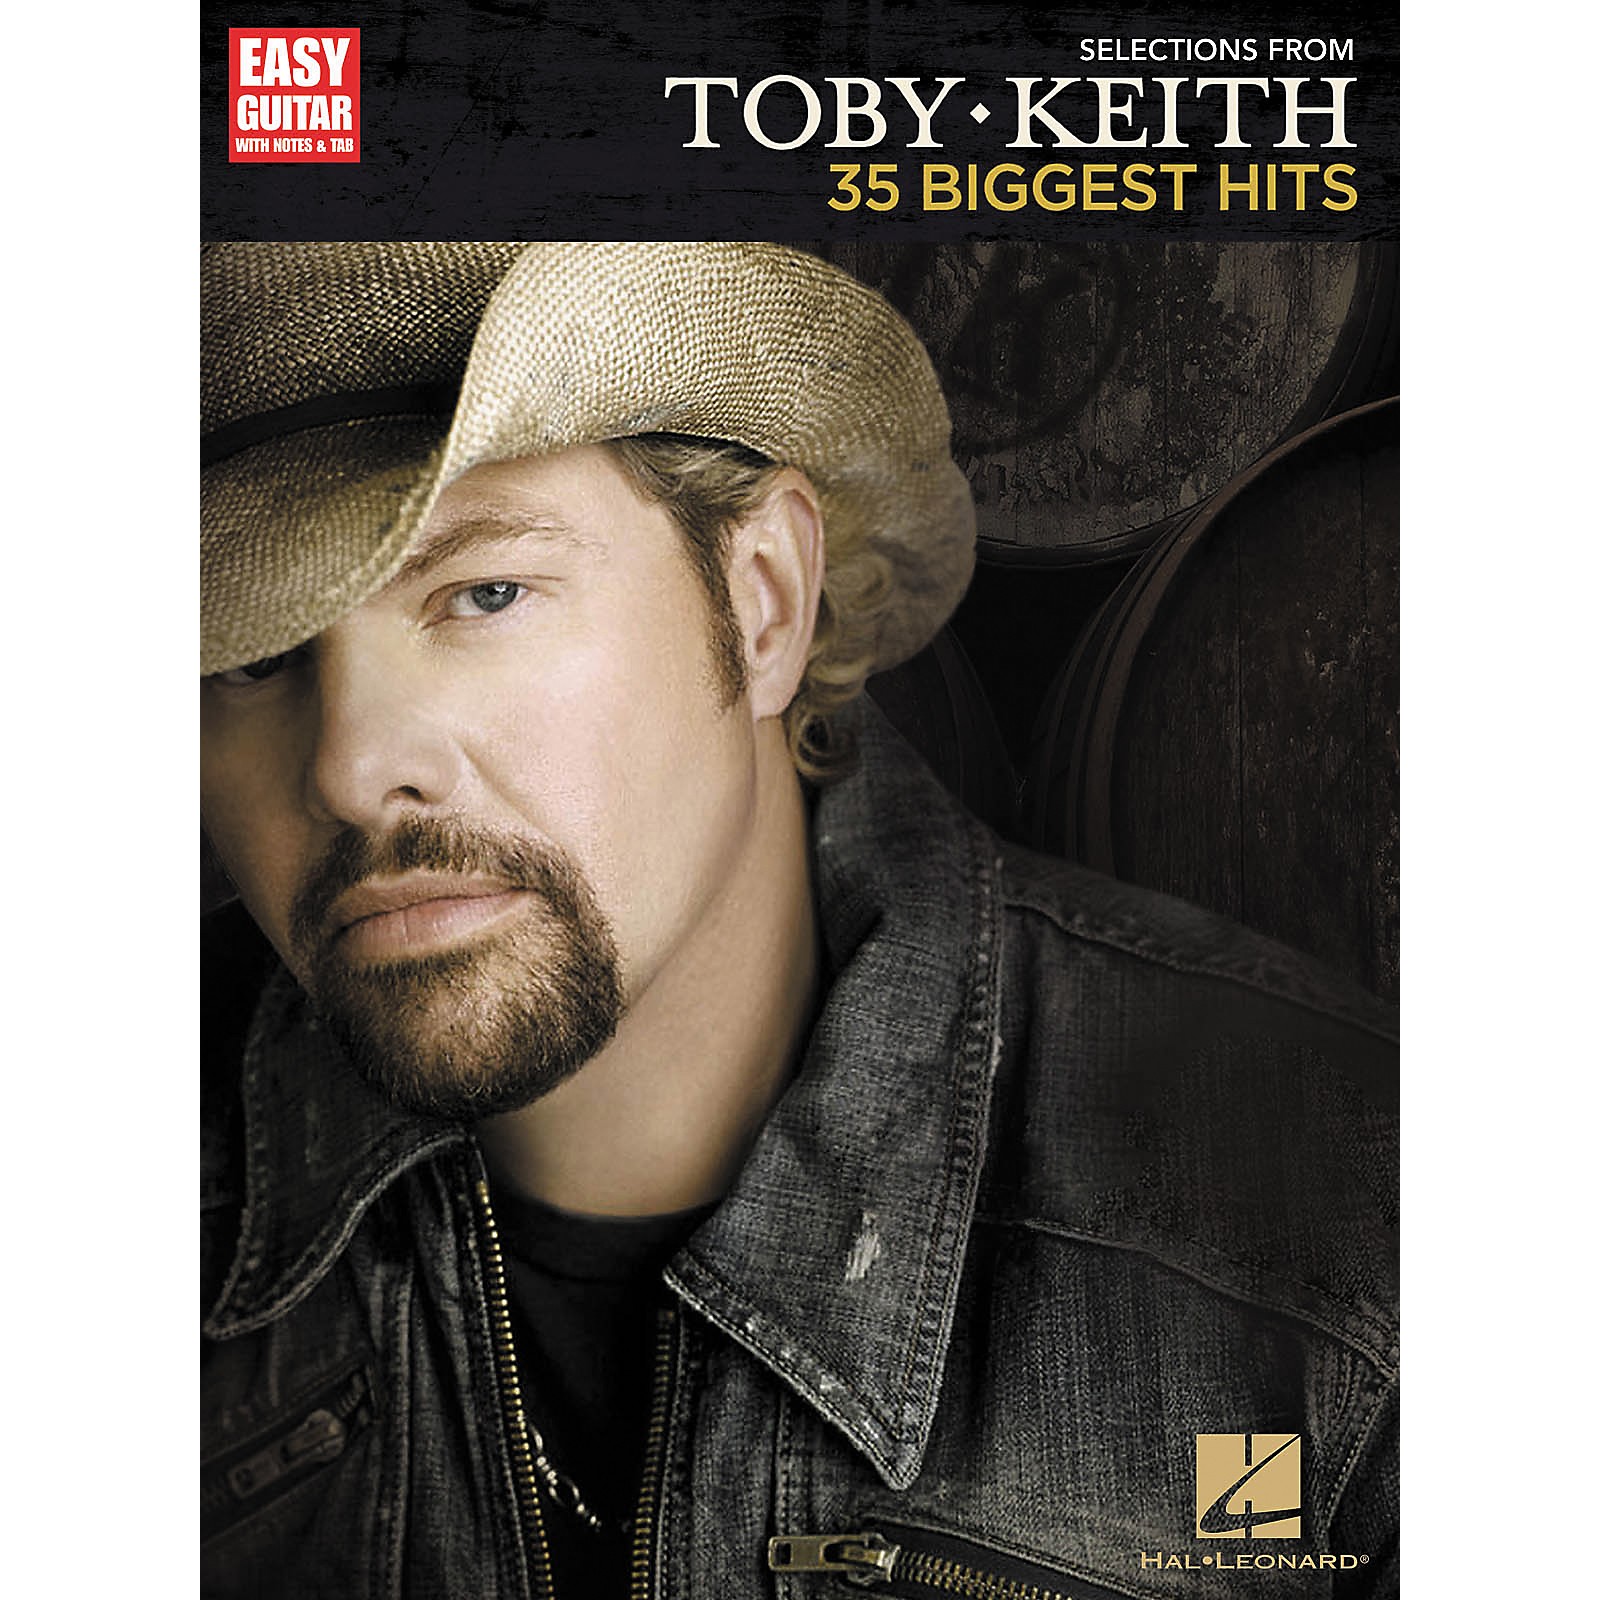 Hal Leonard Selections From Toby Keith: 35 Biggest Hits - Easy Guitar ...